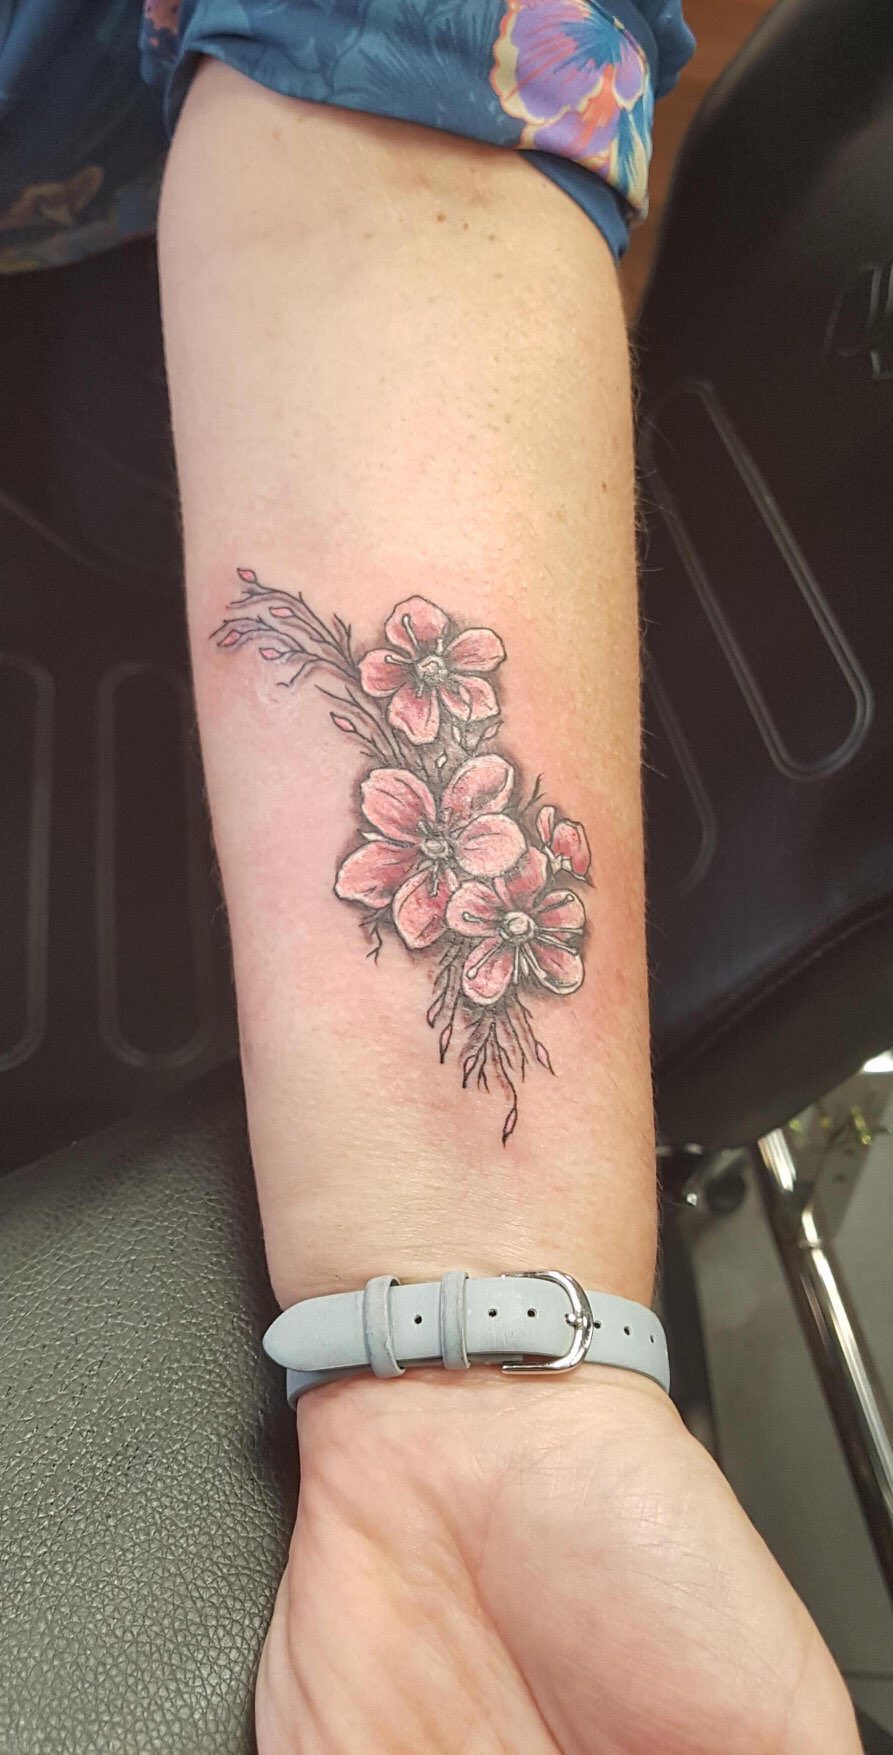 Devils Own Tattoos on X: "Loving this realistic cherry blossom to the forearm, by Thrax. The white really helps make this piece pop, but remember don't rely too heavily on white in